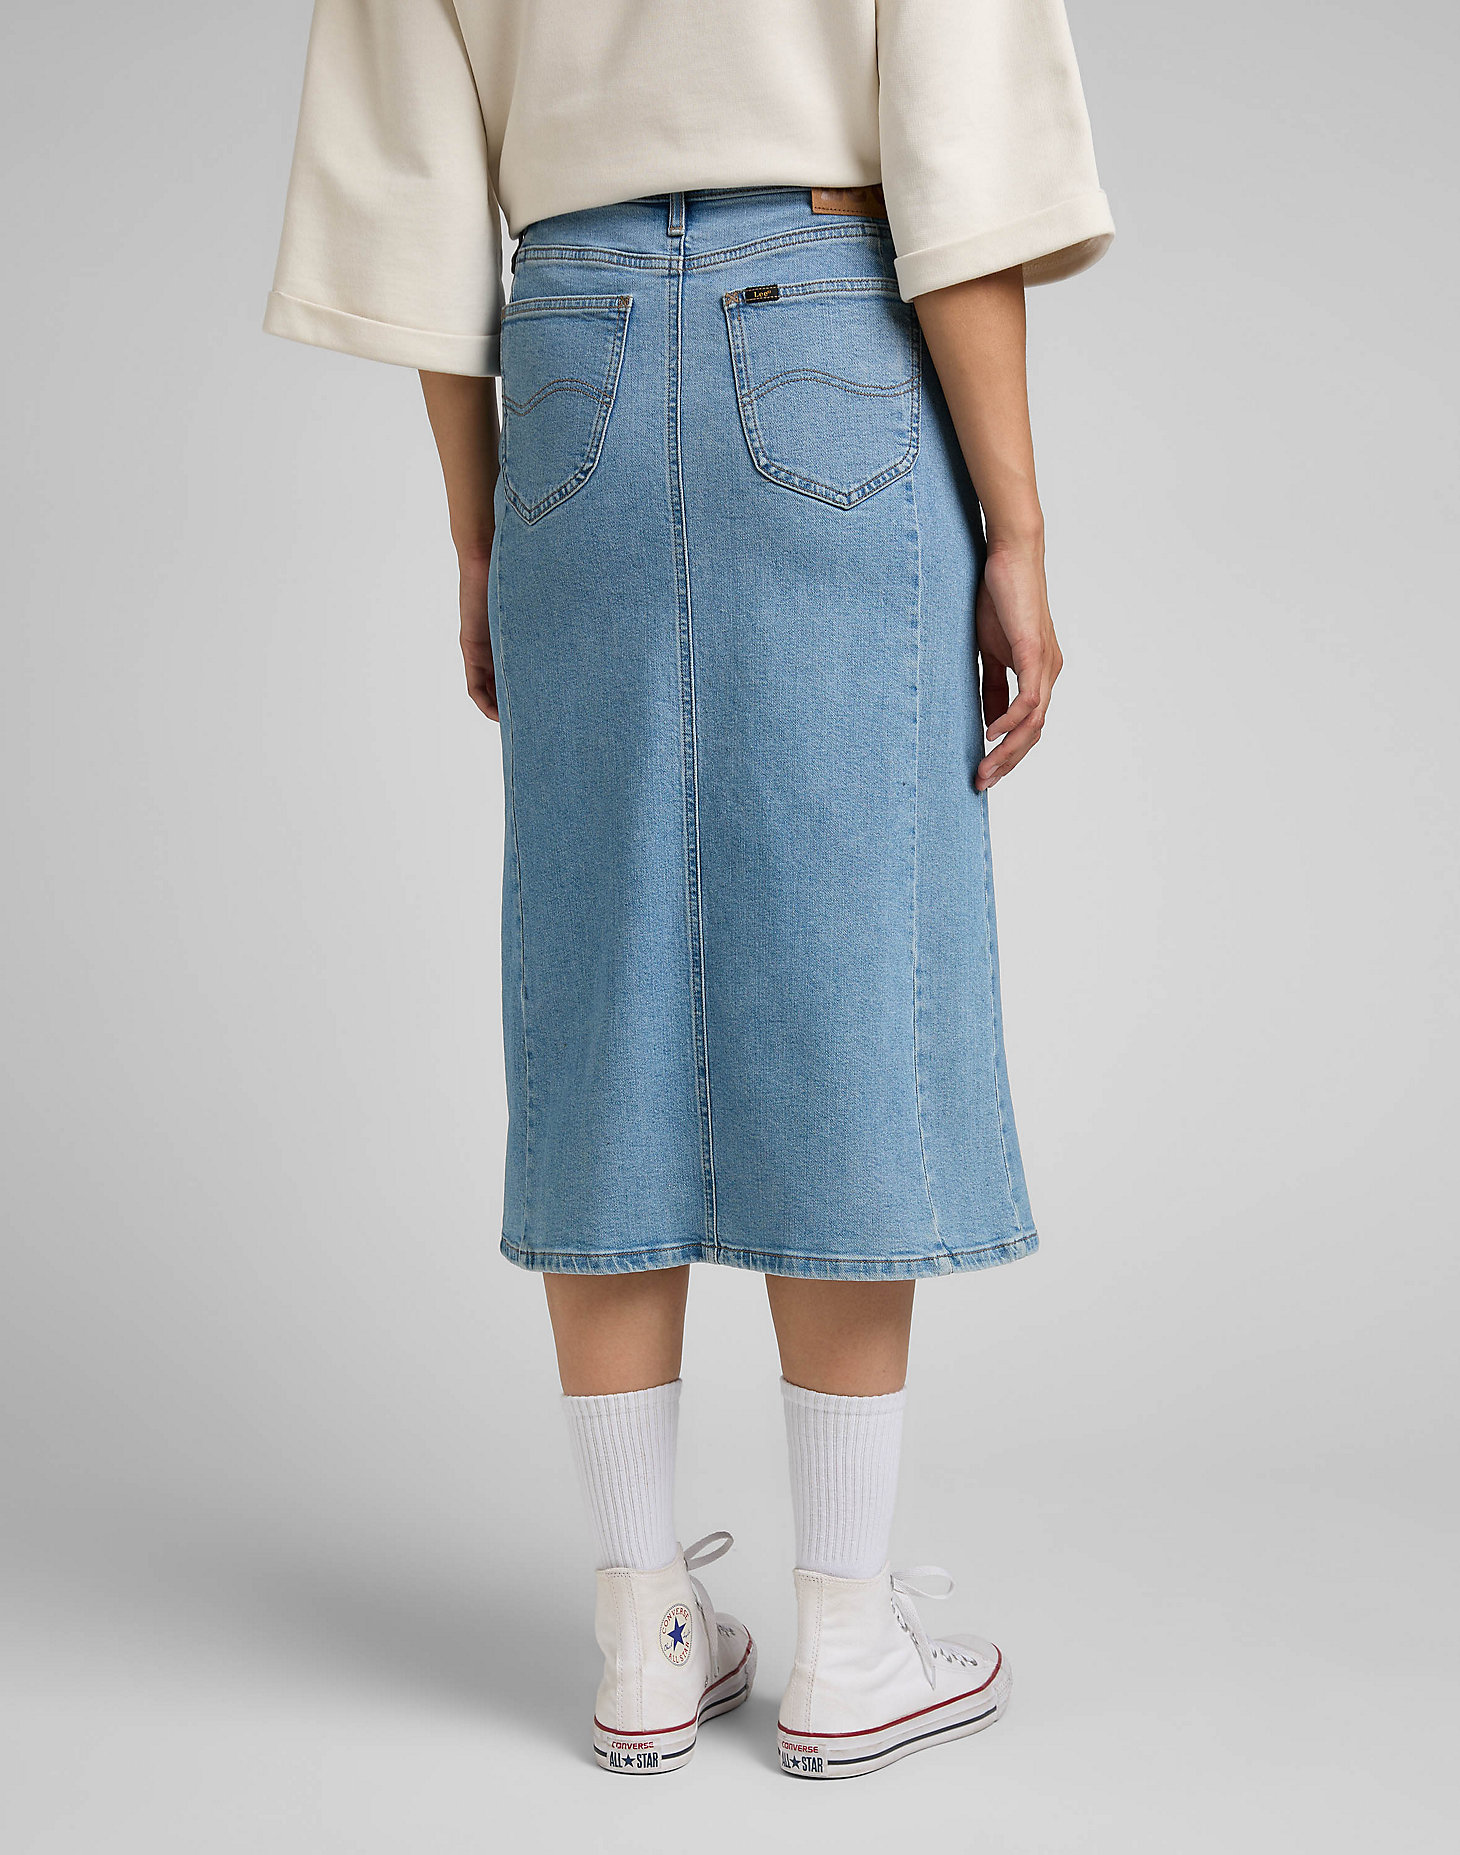 Midi Skirt in Partly Cloudy alternative view 1